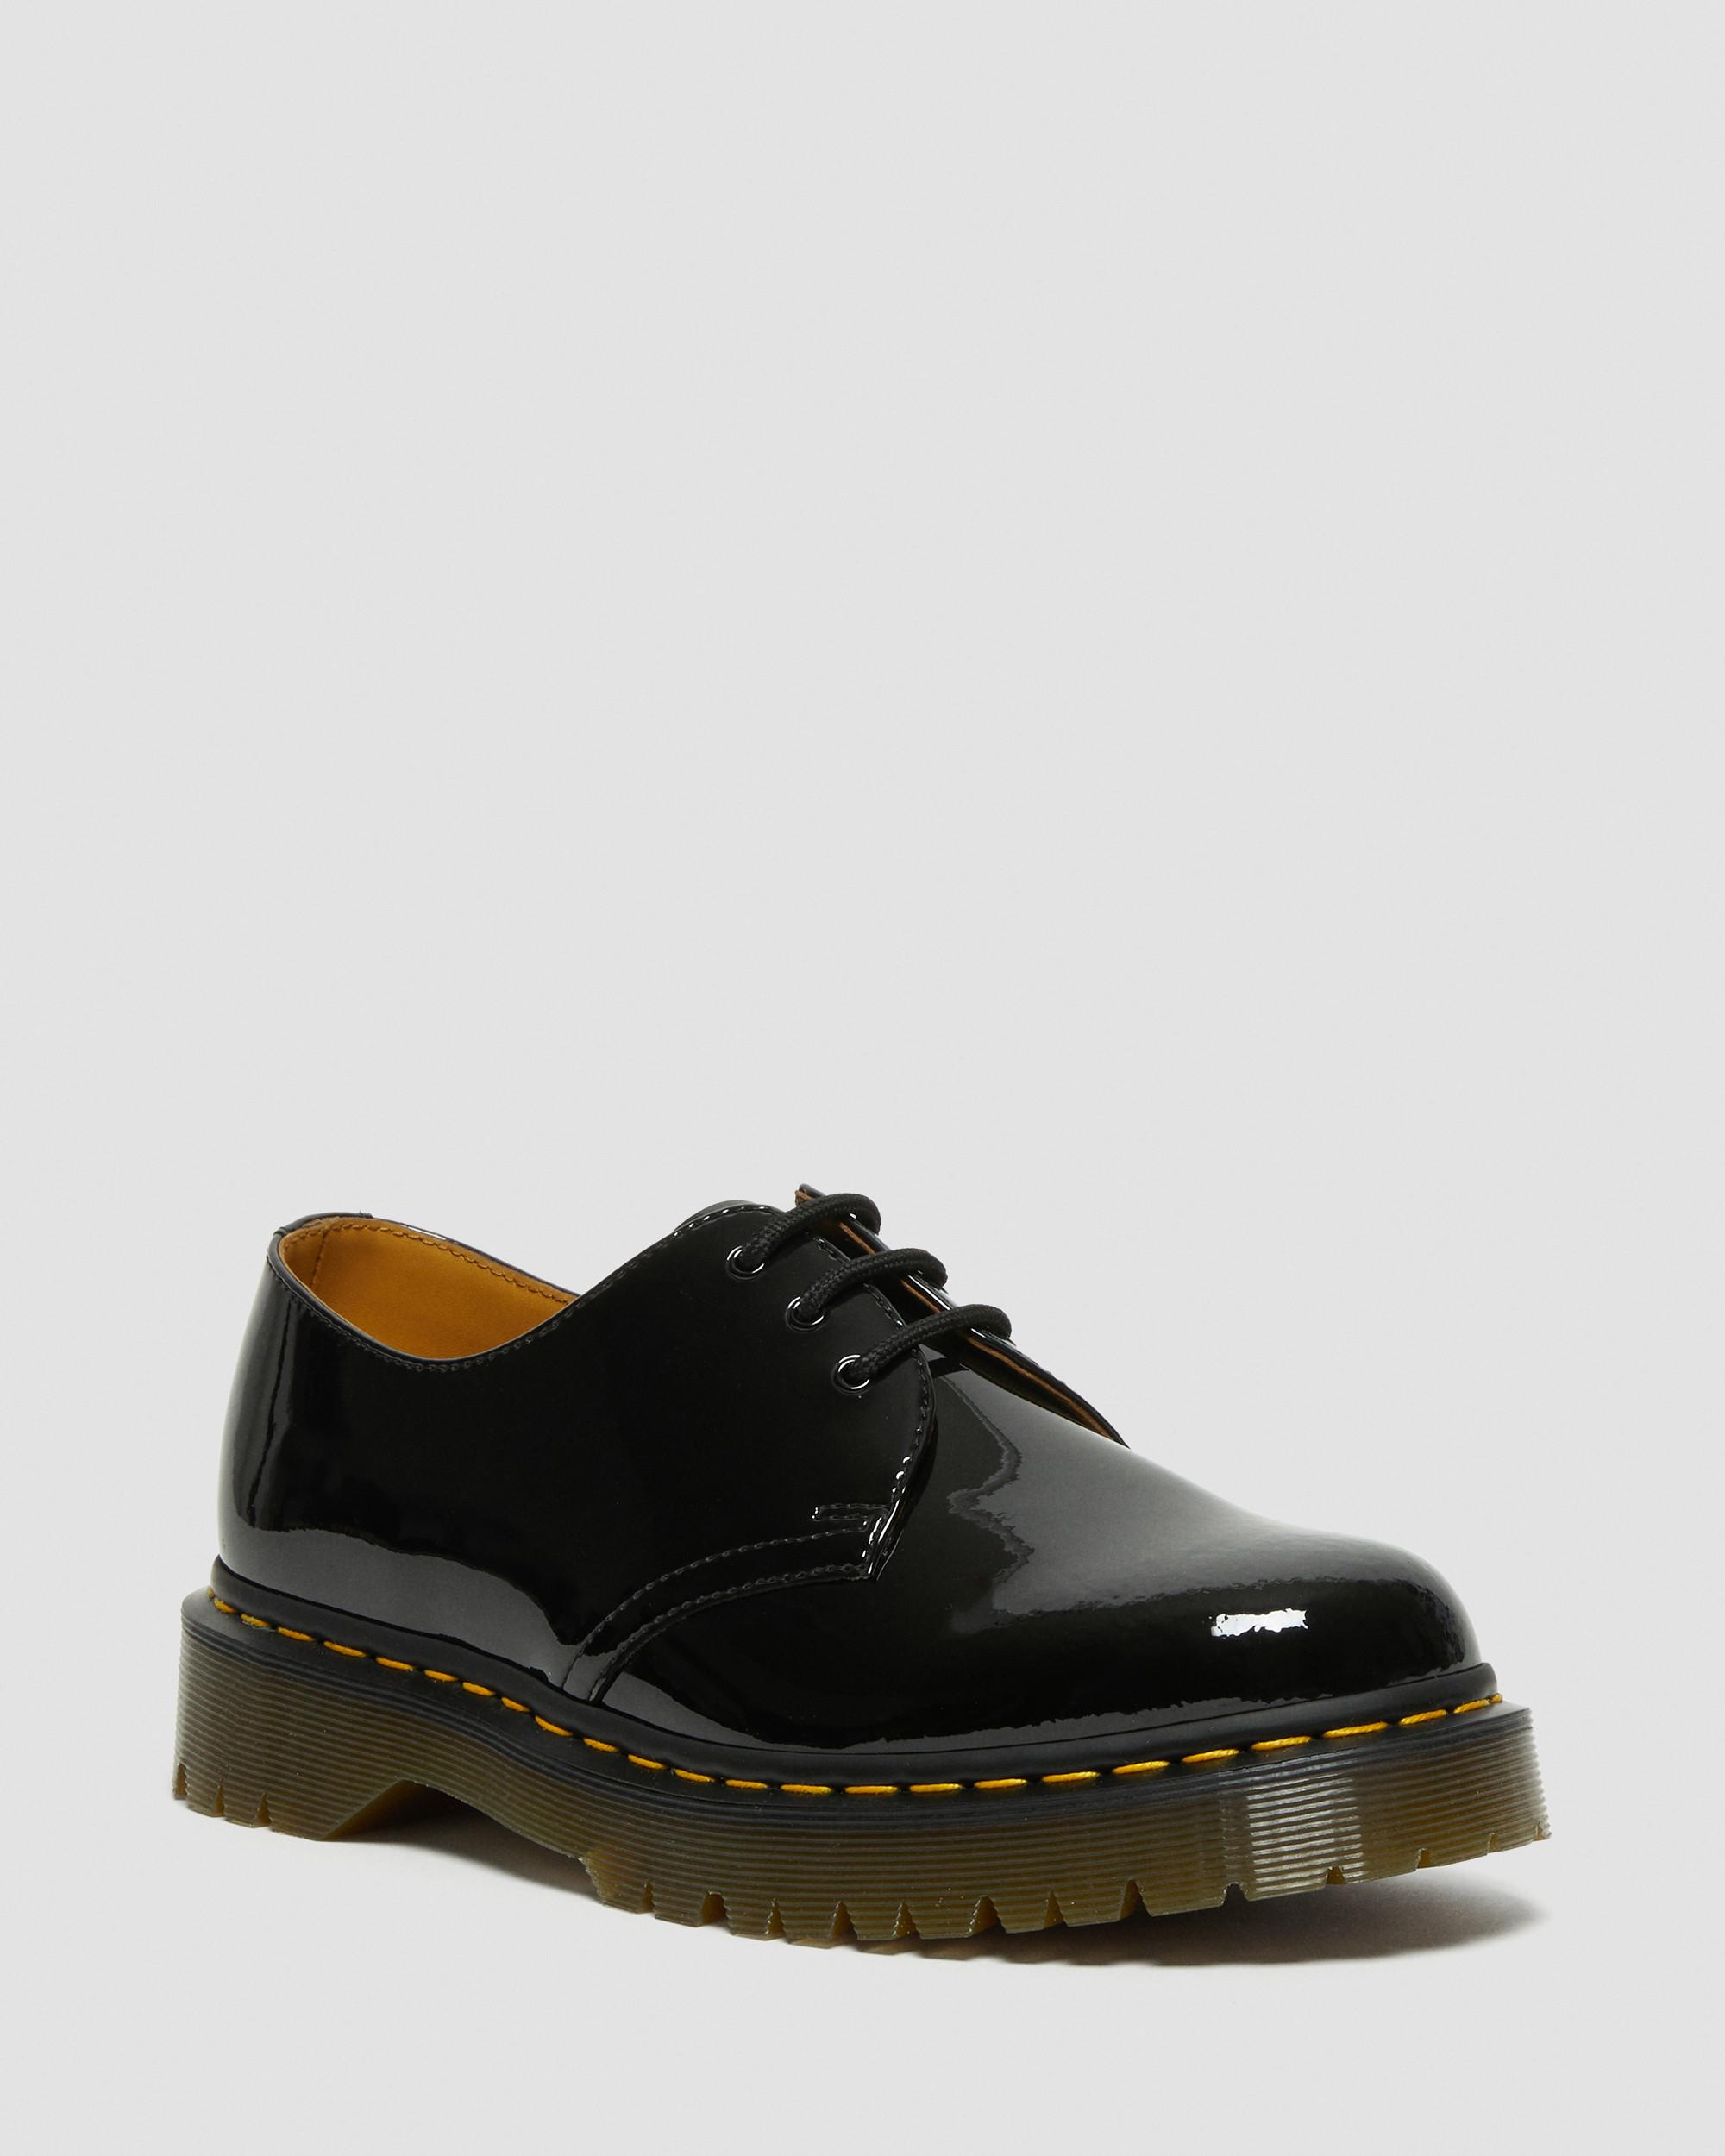 1461 Bex Patent Leather Oxford Shoes, Black